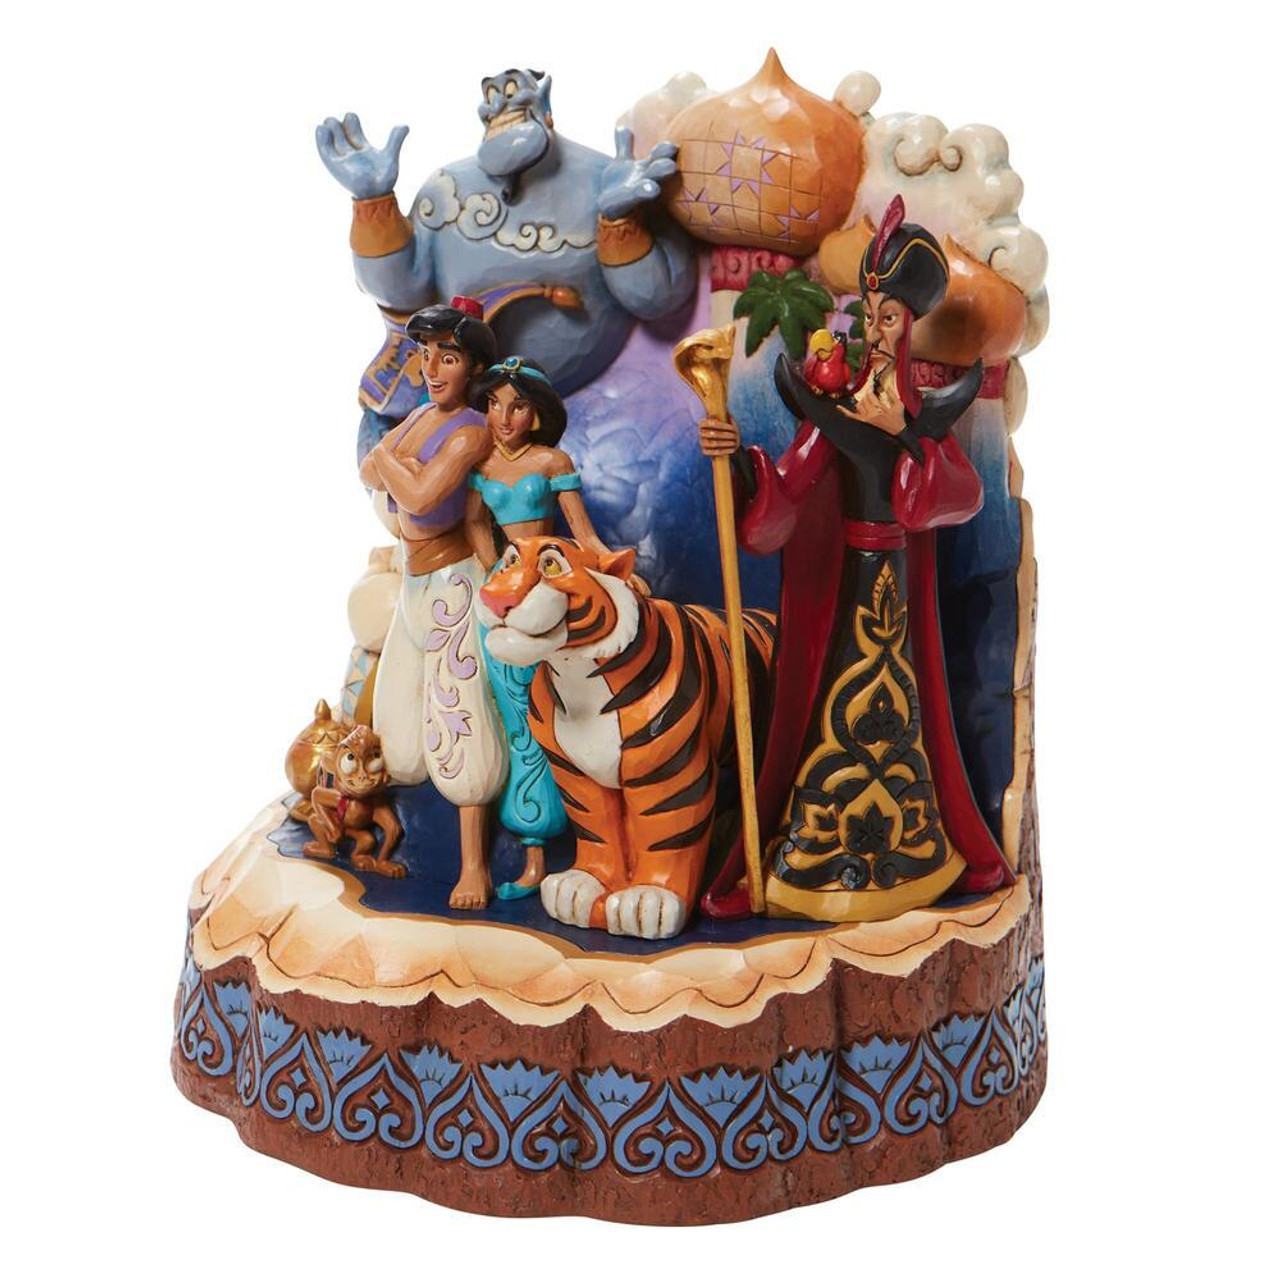 Villains Carved by Heart Disney Traditions Statue by Enesco